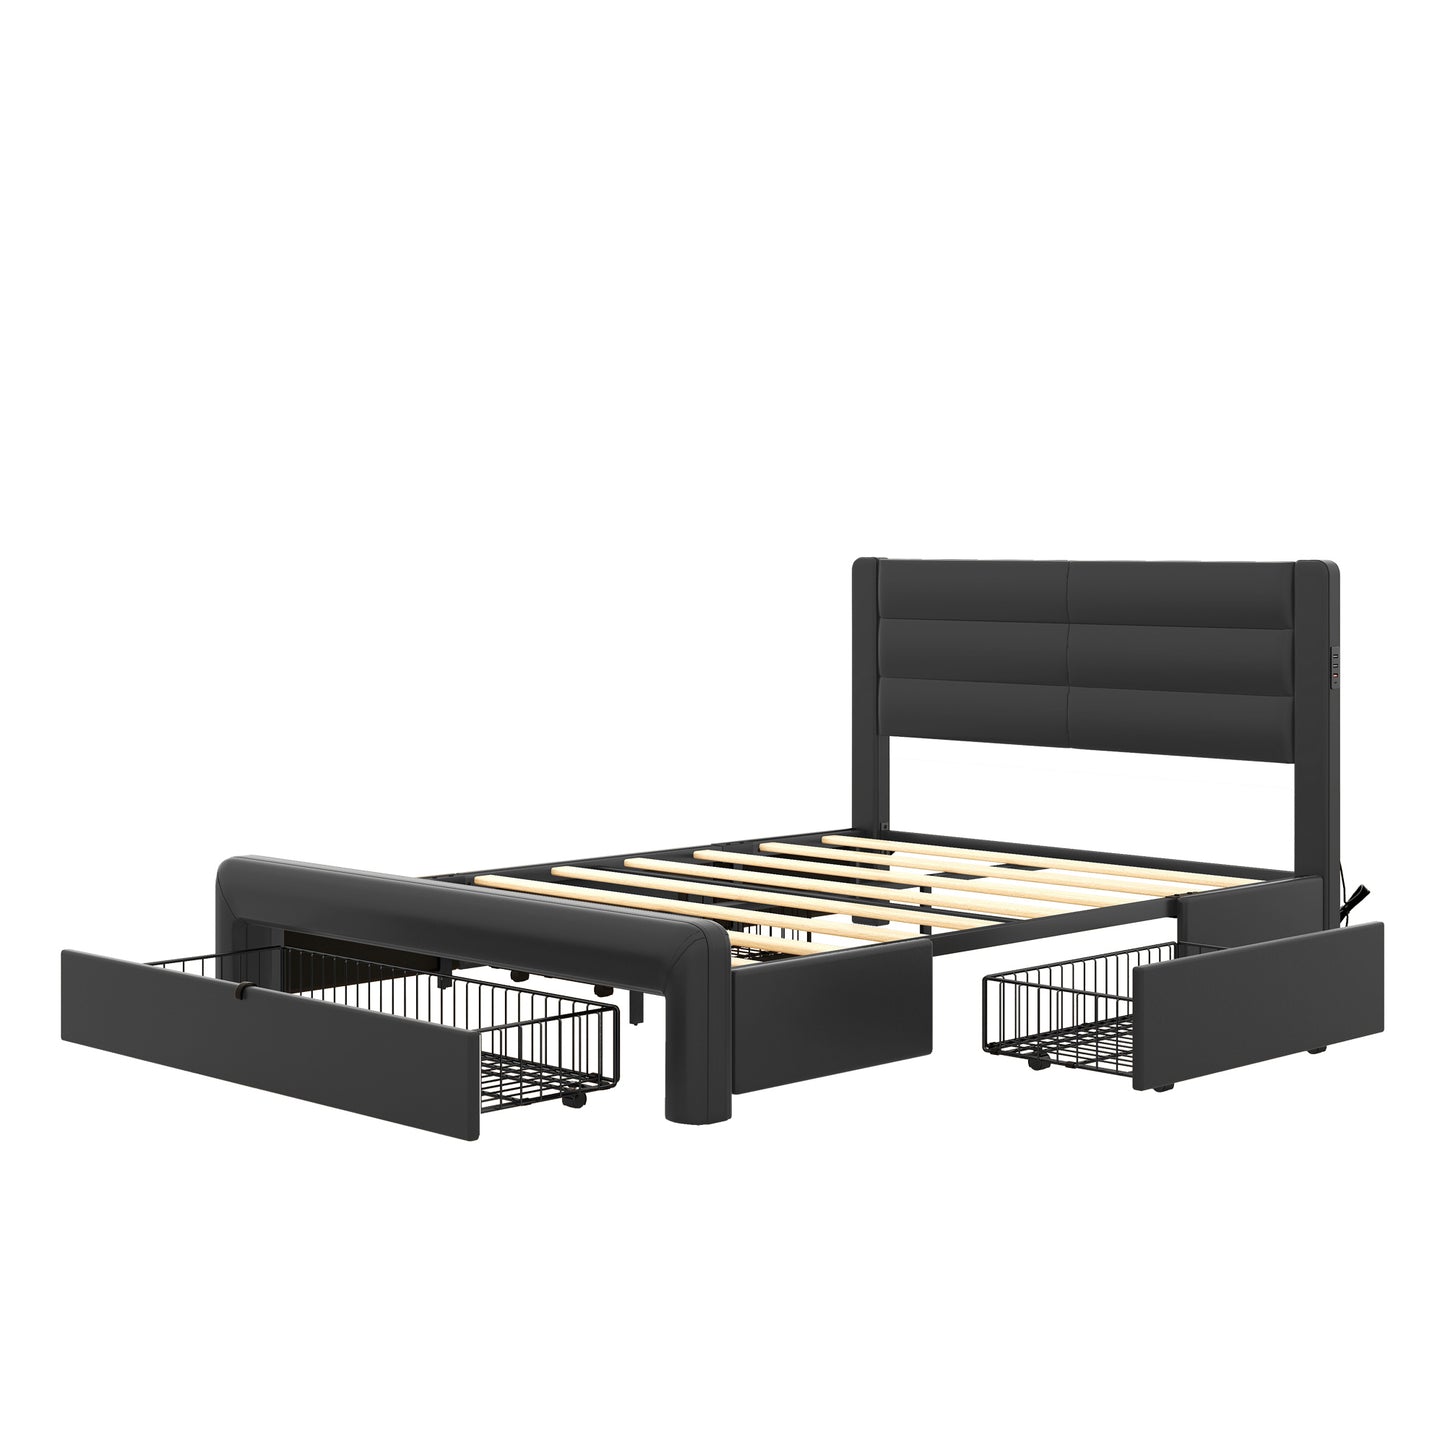 Queen Size Bed Frame with Drawers Storage, Leather Upholstered Platform Bed with Charging Station, Black